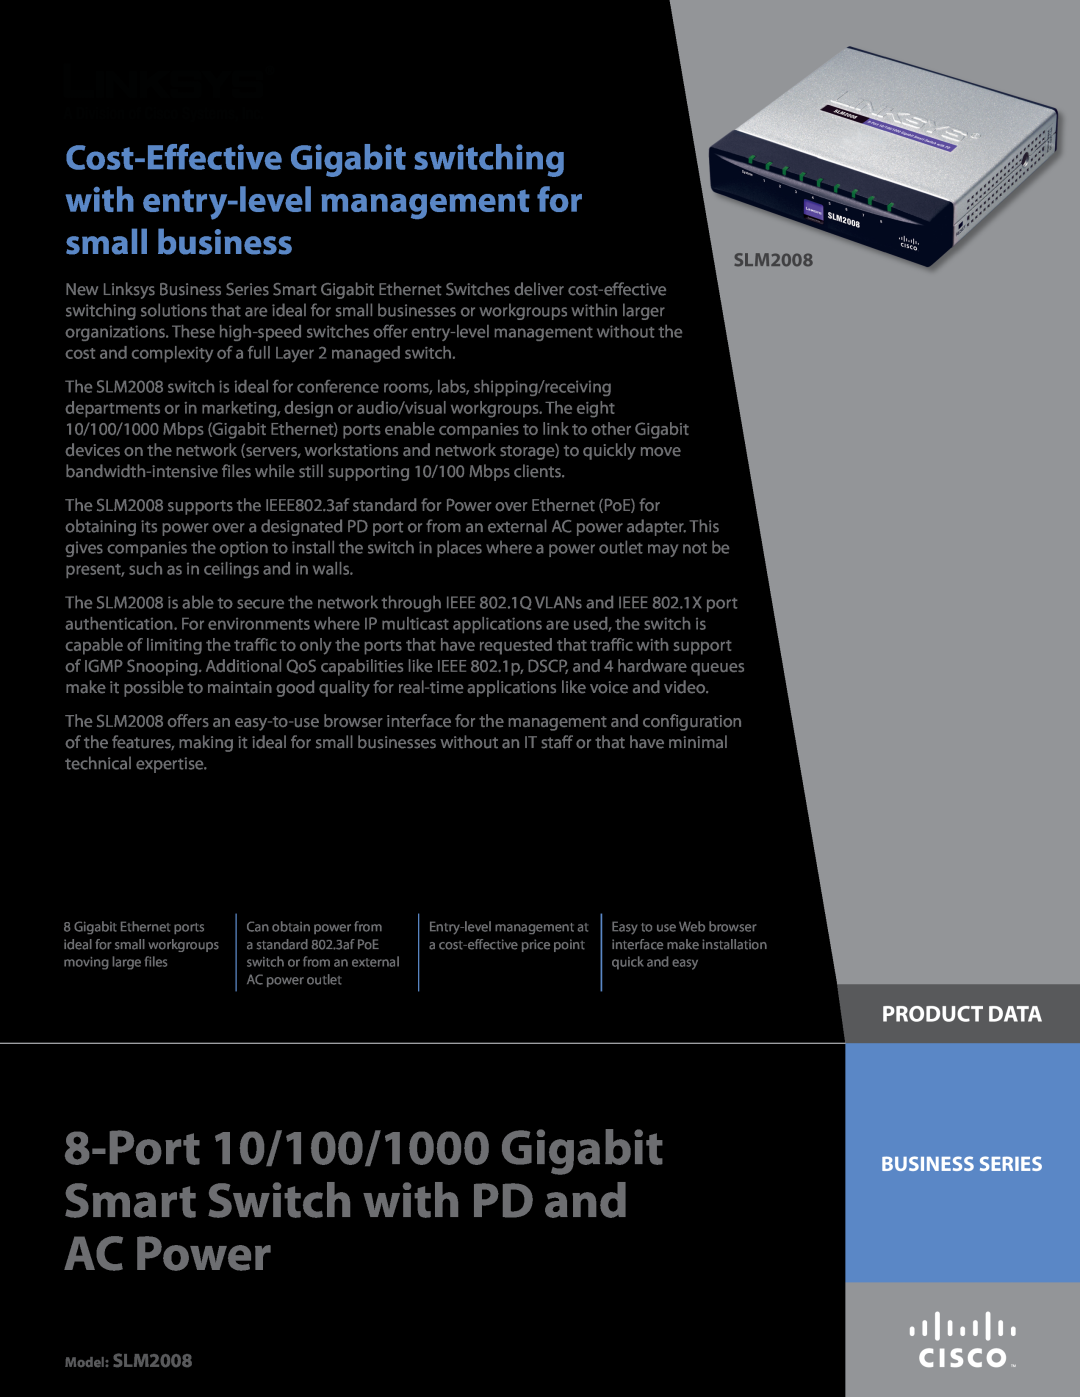 Linksys SLM2008 manual Product Data, Business Series, Port 10/100/1000 Gigabit Smart Switch with PD and AC Power 